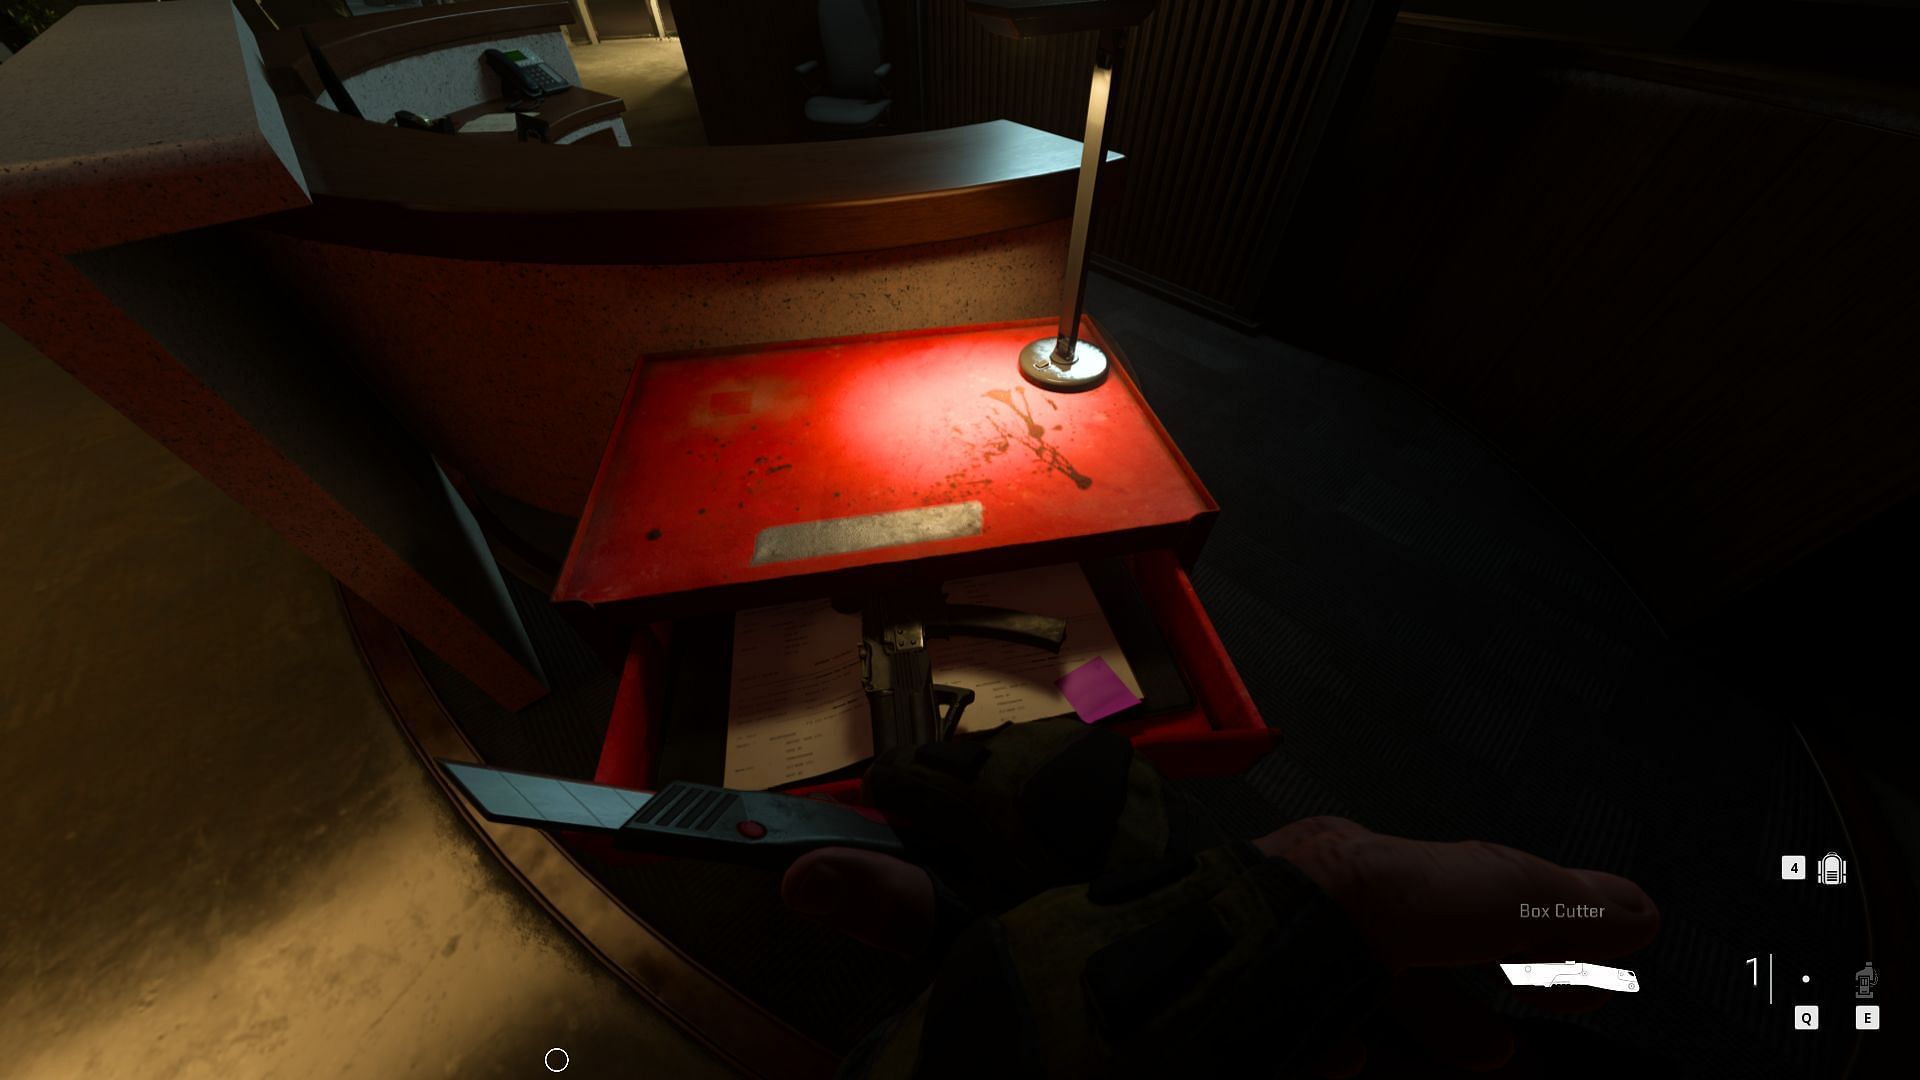 Box cutter in the orange drawer (Image via Activision)